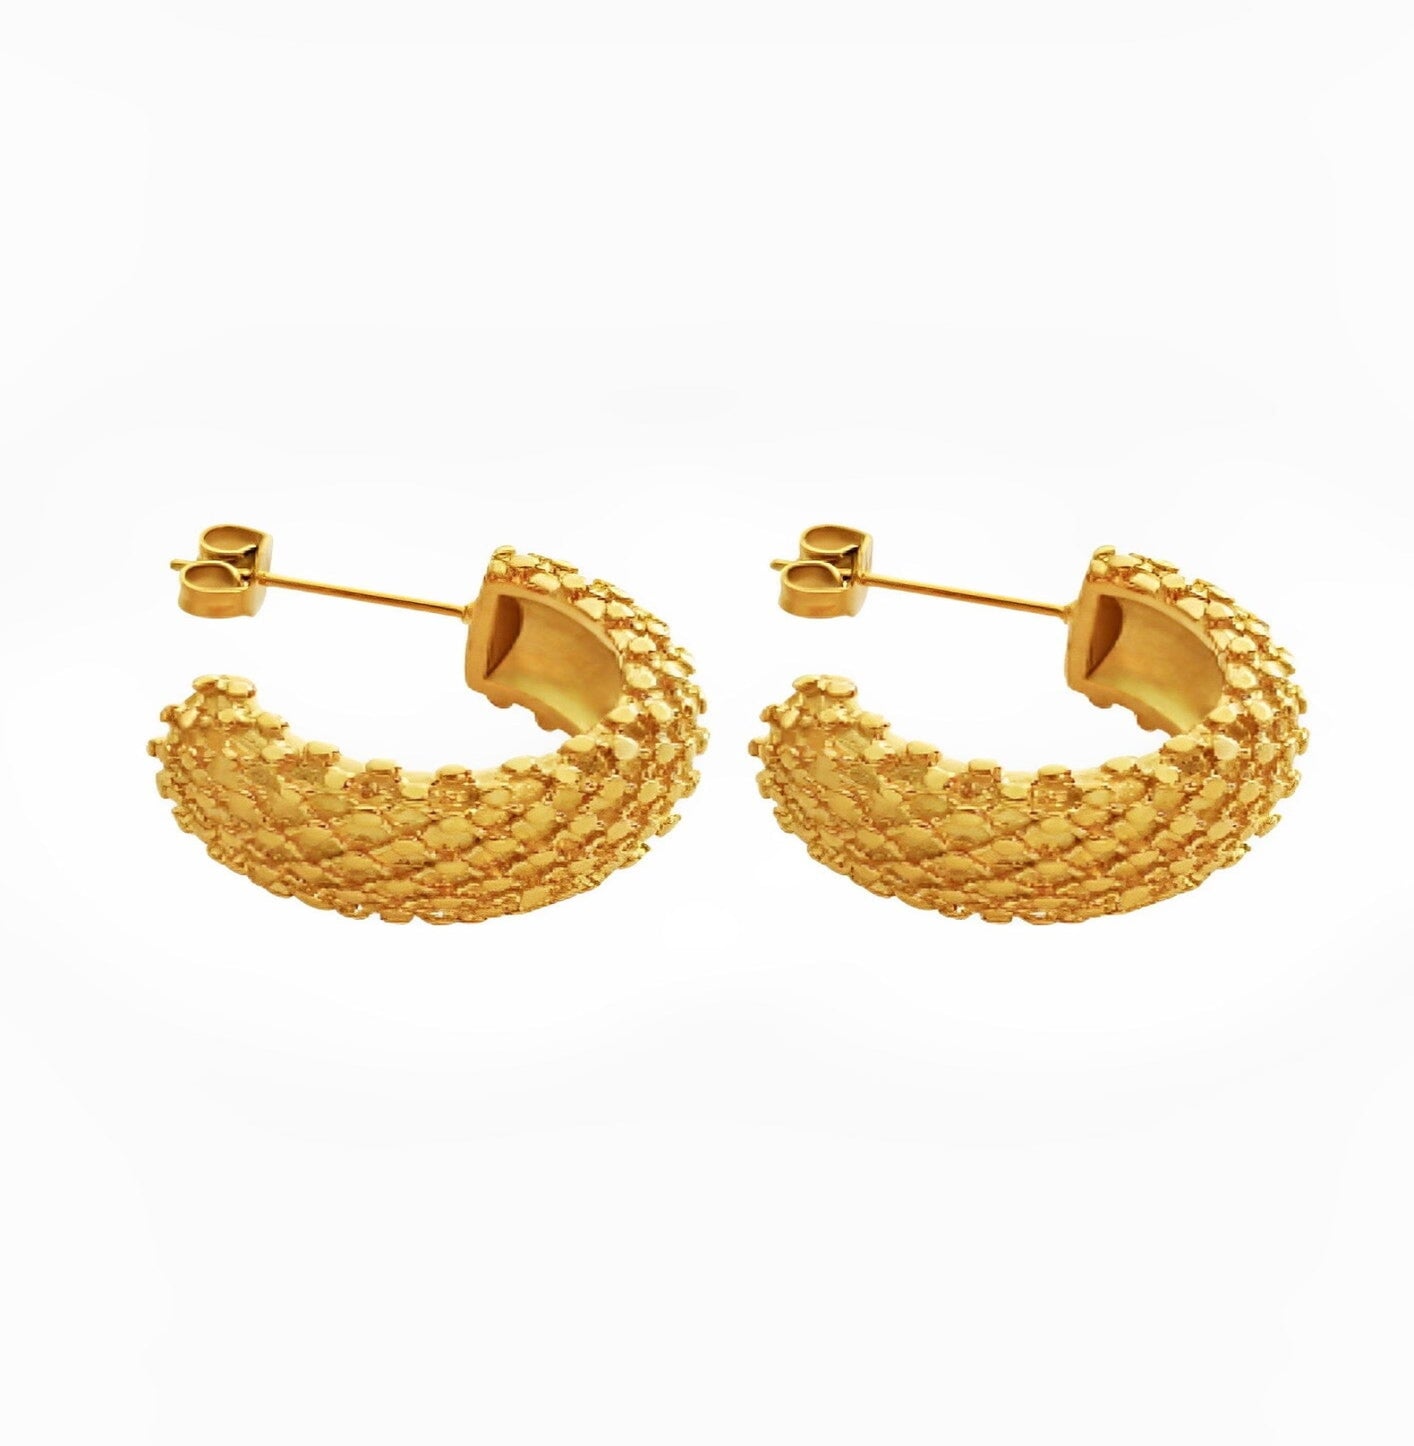 PUNK EARRINGS earing Yubama Jewelry Online Store - The Elegant Designs of Gold and Silver ! 